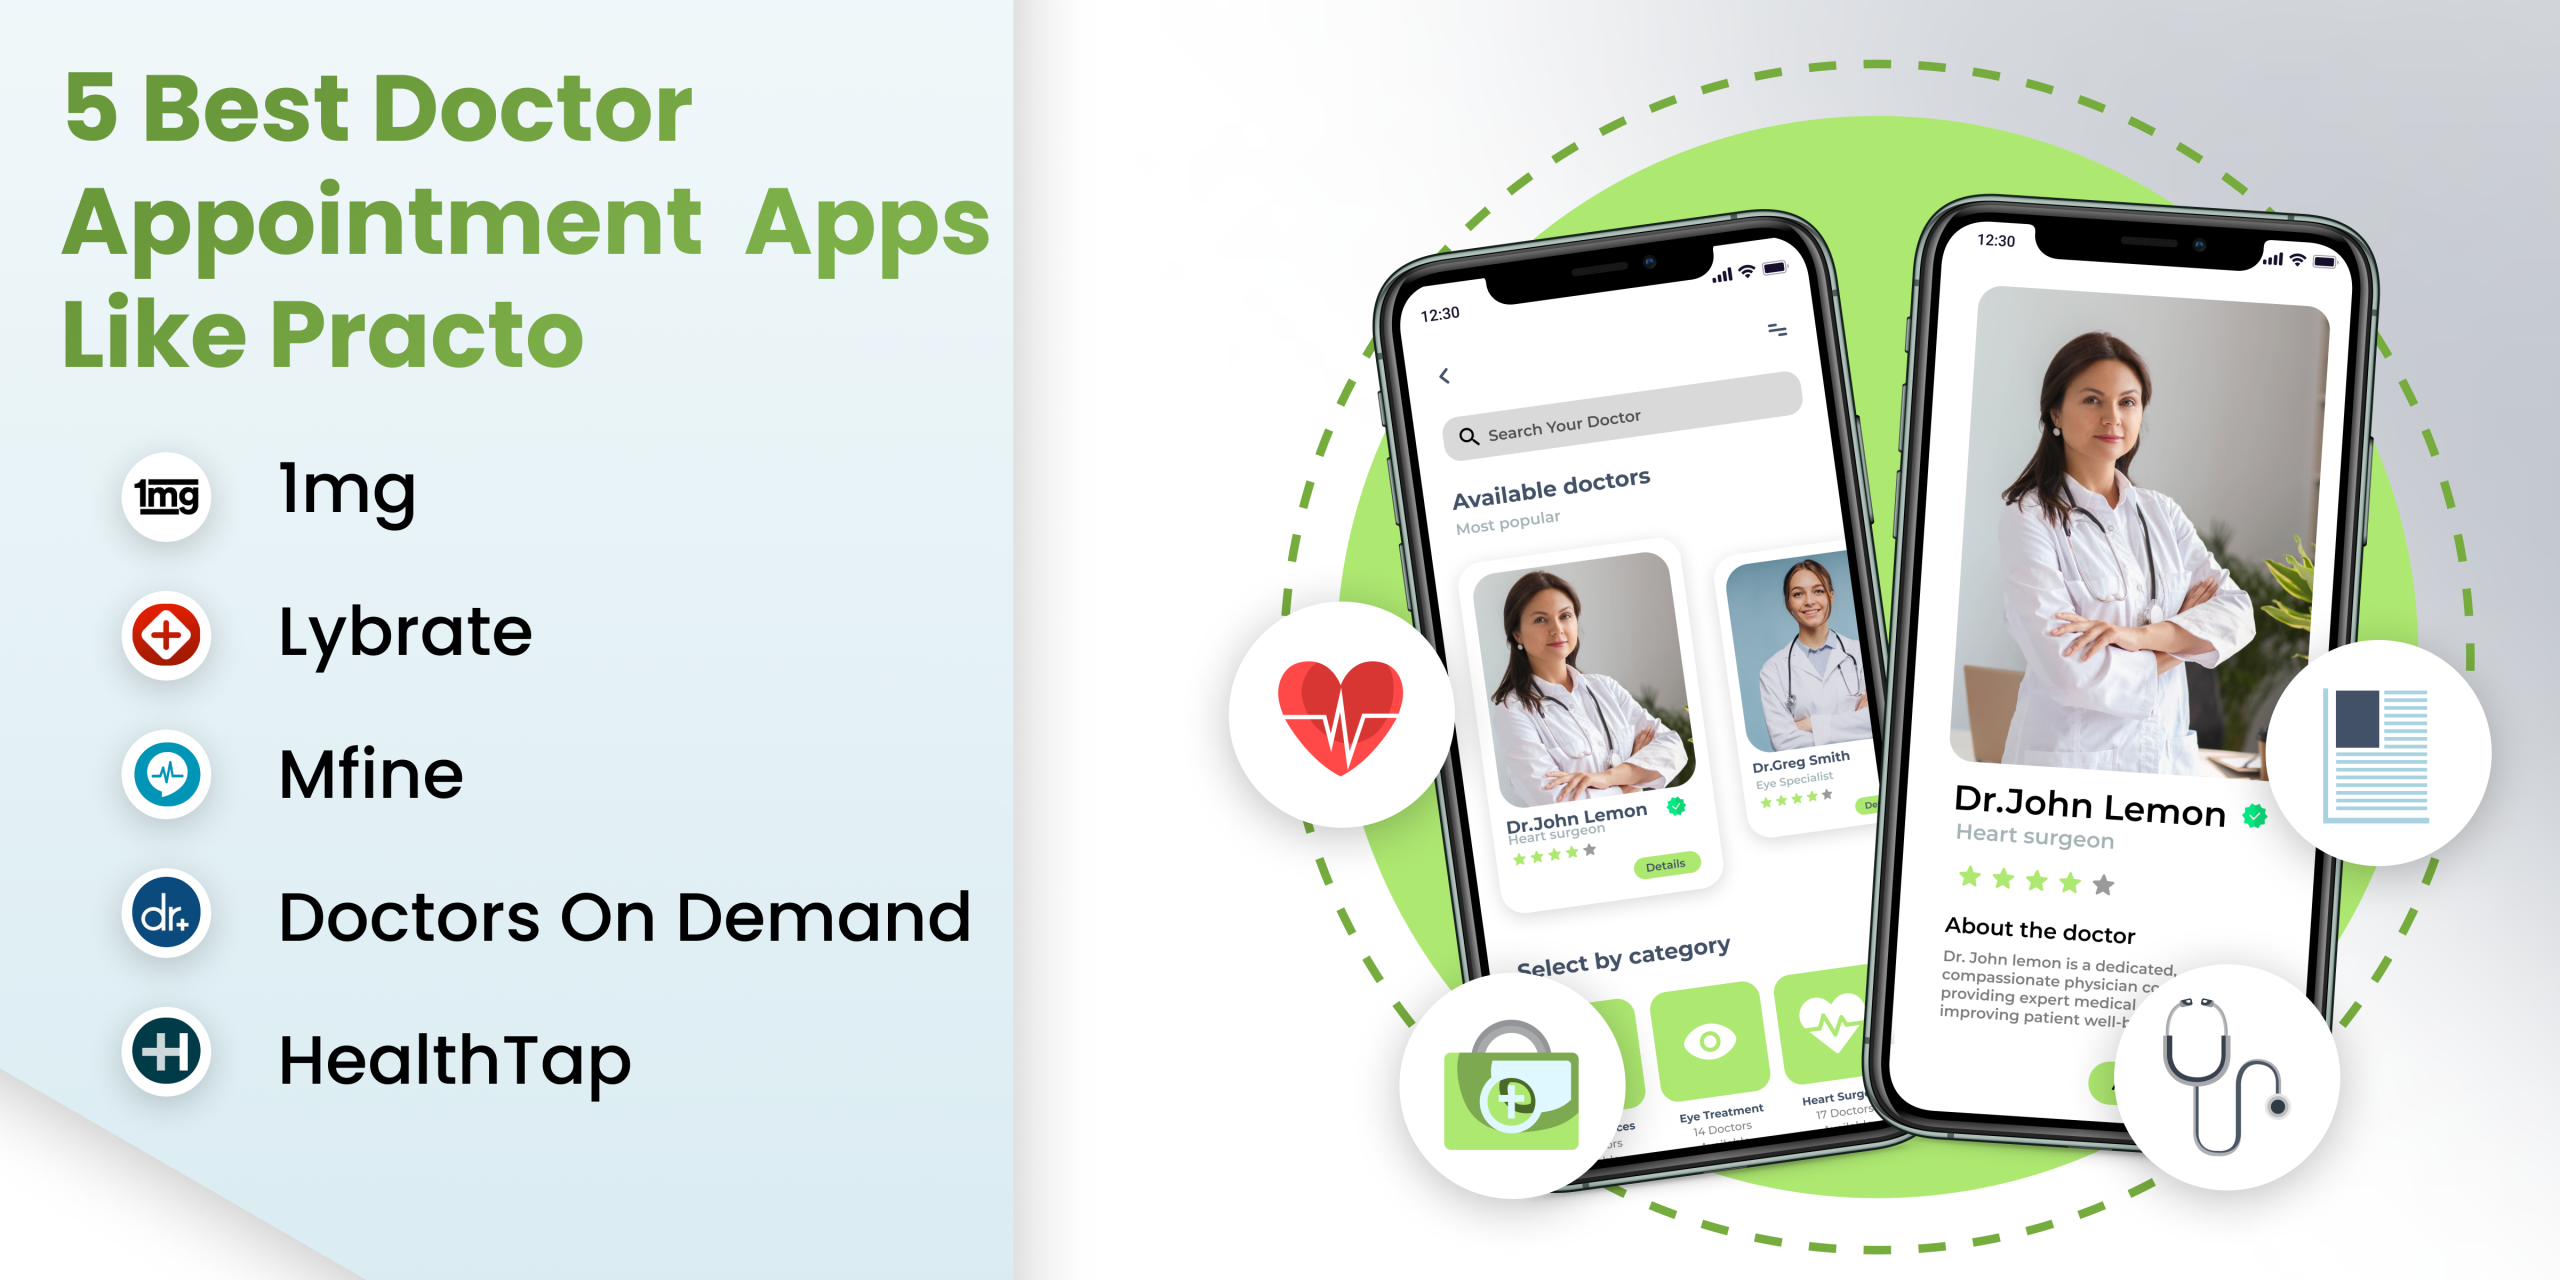 5 Best Doctor Appointment Apps Like Practo